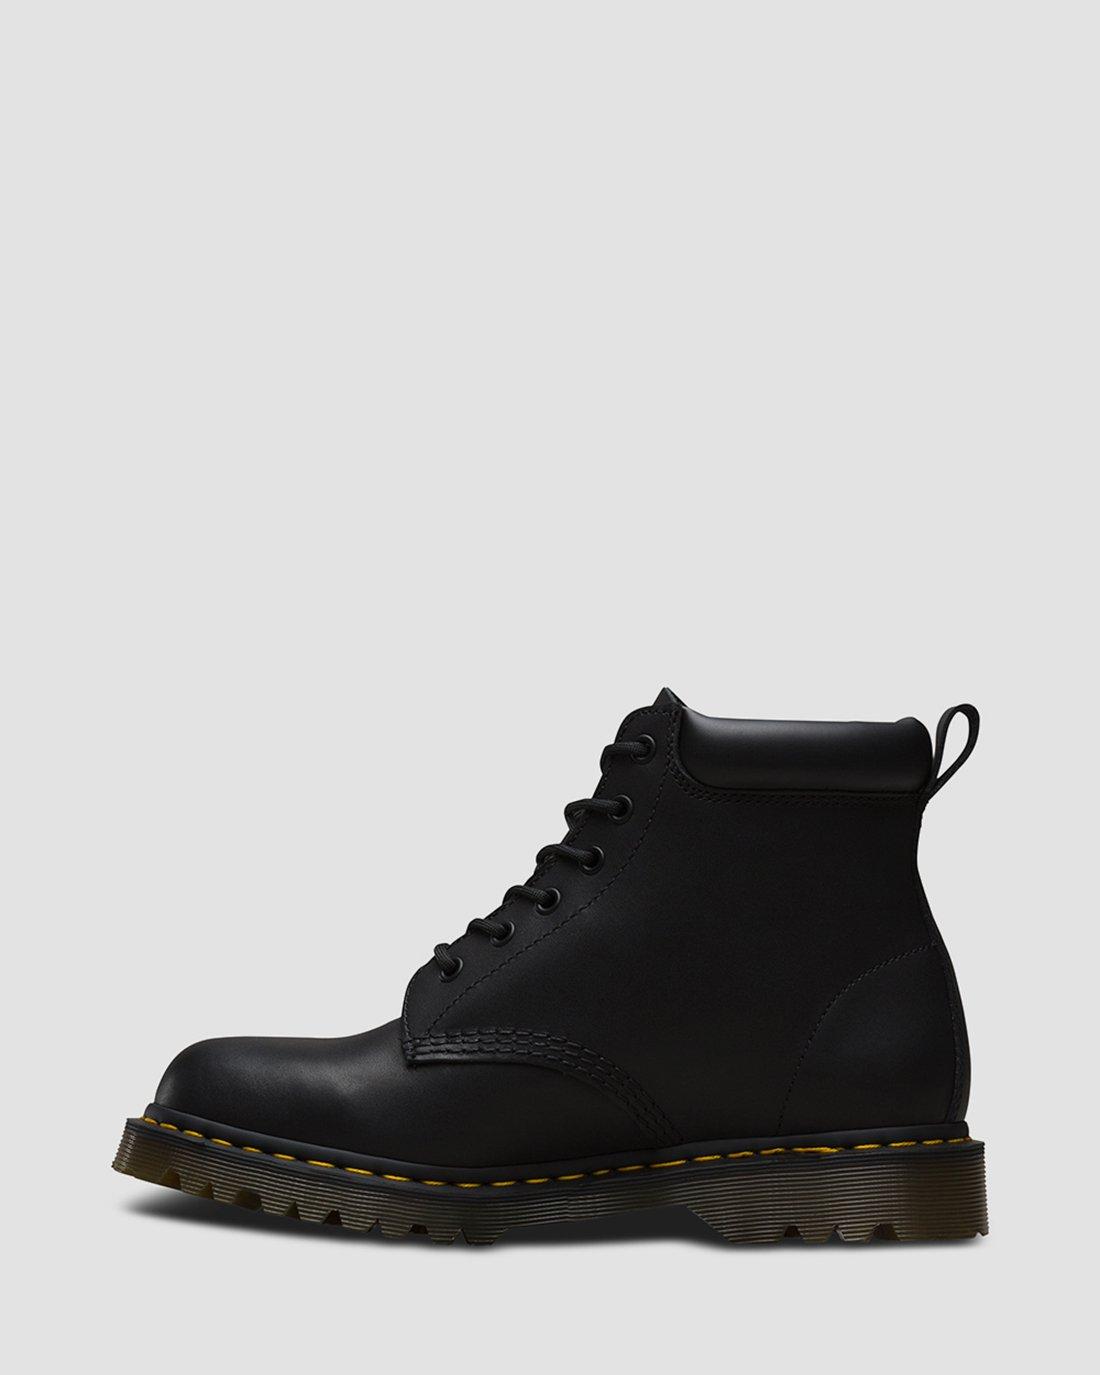 939 GREASY LEATHER BOOTS Dr. Martens